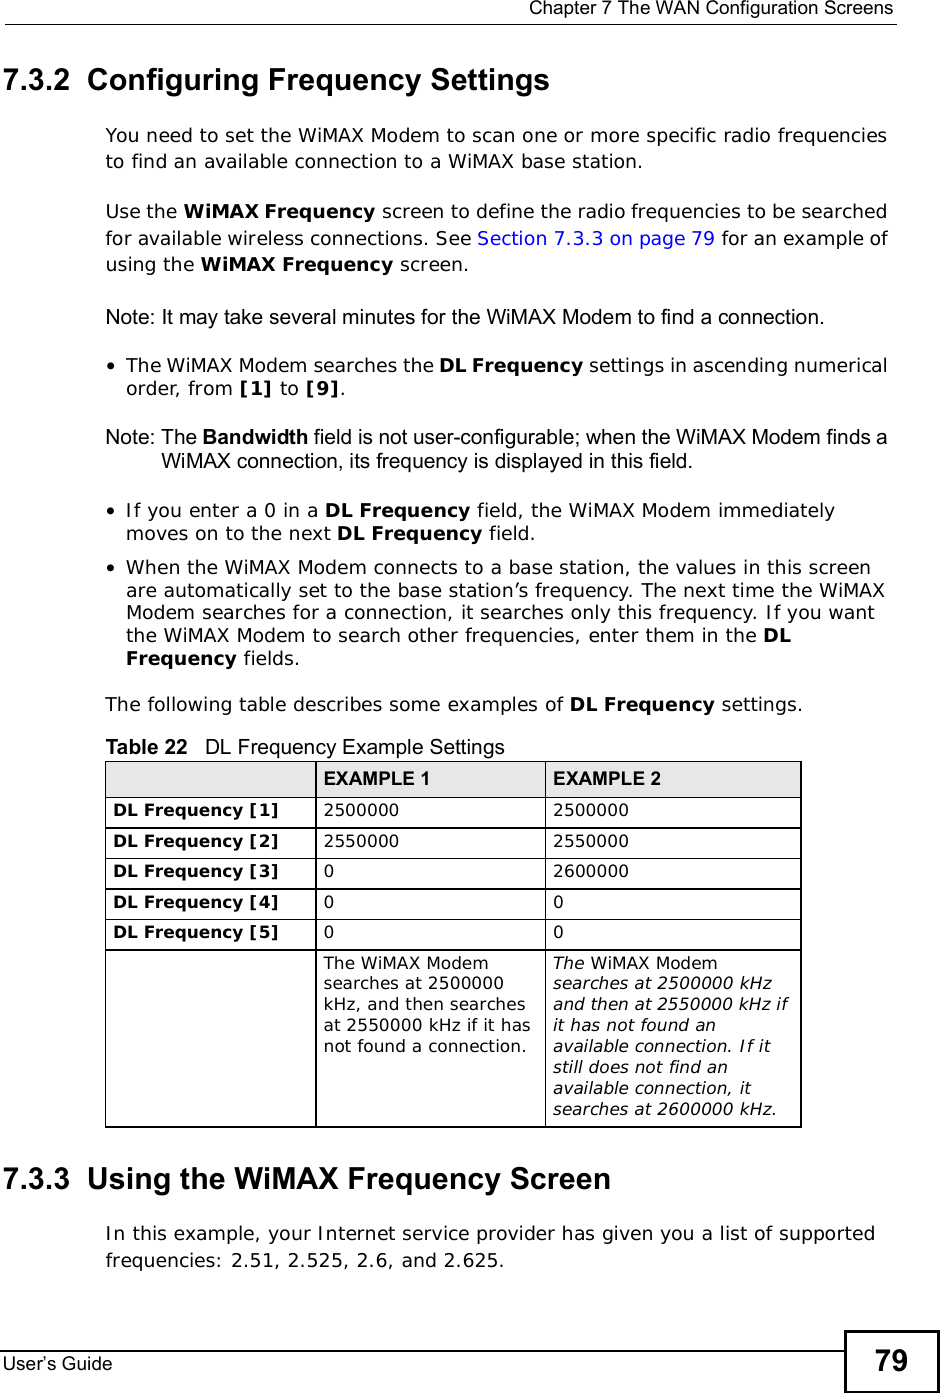  Chapter 7The WAN Configuration ScreensUser s Guide 797.3.2  Configuring Frequency SettingsYou need to set the WiMAX Modem to scan one or more specific radio frequencies to find an available connection to a WiMAX base station. Use the WiMAX Frequency screen to define the radio frequencies to be searched for available wireless connections. See Section 7.3.3 on page 79 for an example of using the WiMAX Frequency screen.Note: It may take several minutes for the WiMAX Modem to find a connection.•The WiMAX Modem searches the DL Frequency settings in ascending numerical order, from [1] to [9].Note: The Bandwidth field is not user-configurable; when the WiMAX Modem finds a WiMAX connection, its frequency is displayed in this field.•If you enter a 0 in a DL Frequency field, the WiMAX Modem immediately moves on to the next DL Frequency field.•When the WiMAX Modem connects to a base station, the values in this screen are automatically set to the base station’s frequency. The next time the WiMAX Modem searches for a connection, it searches only this frequency. If you want the WiMAX Modem to search other frequencies, enter them in the DLFrequency fields.The following table describes some examples of DL Frequency settings.7.3.3  Using the WiMAX Frequency ScreenIn this example, your Internet service provider has given you a list of supported frequencies: 2.51, 2.525, 2.6, and 2.625. Table 22   DL Frequency Example SettingsEXAMPLE 1 EXAMPLE 2DL Frequency [1] 25000002500000DL Frequency [2] 25500002550000DL Frequency [3] 02600000DL Frequency [4] 00DL Frequency [5] 00The WiMAX Modem searches at 2500000 kHz, and then searches at 2550000 kHz if it has not found a connection.The WiMAX Modemsearches at 2500000 kHz and then at 2550000 kHz if it has not found an available connection. If it still does not find an available connection, it searches at 2600000 kHz.